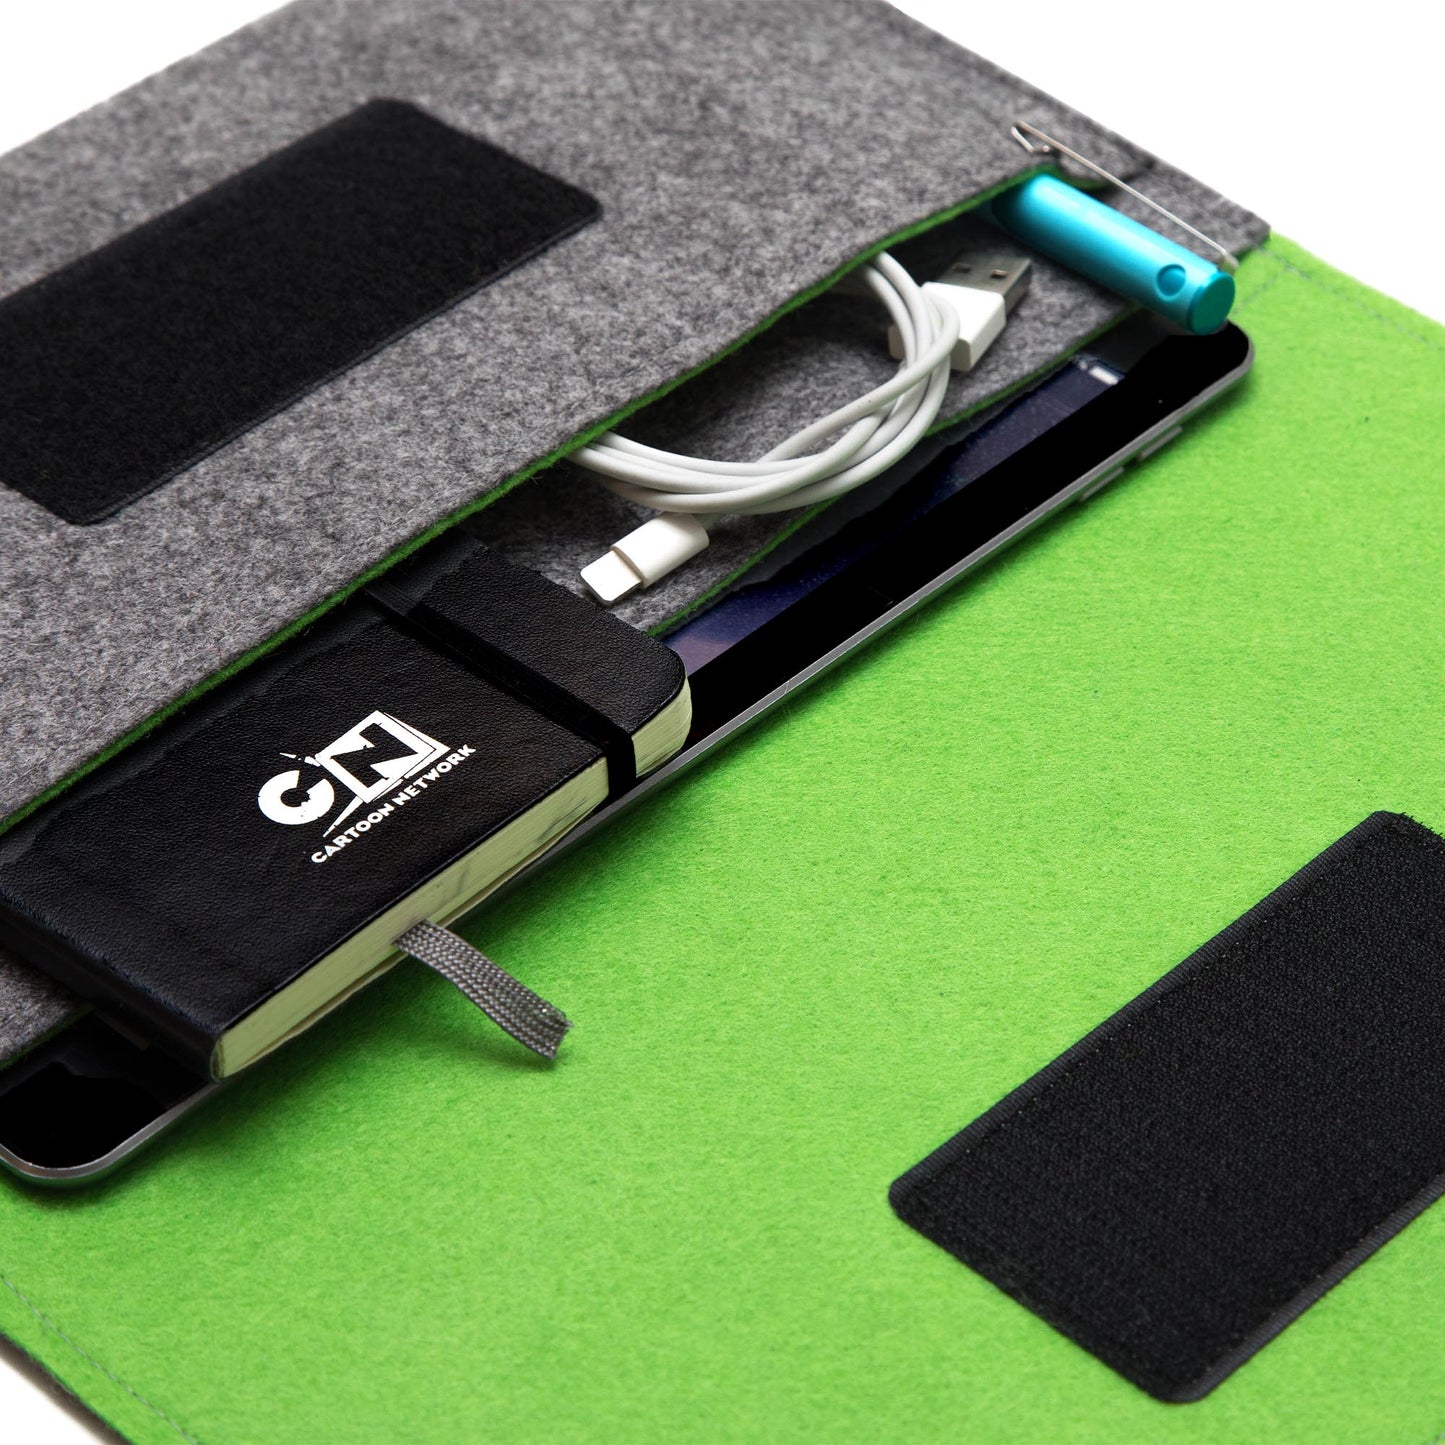 Premium Felt iPad Cover: Ultimate Protection with Accessories Pocket - Grey & Green